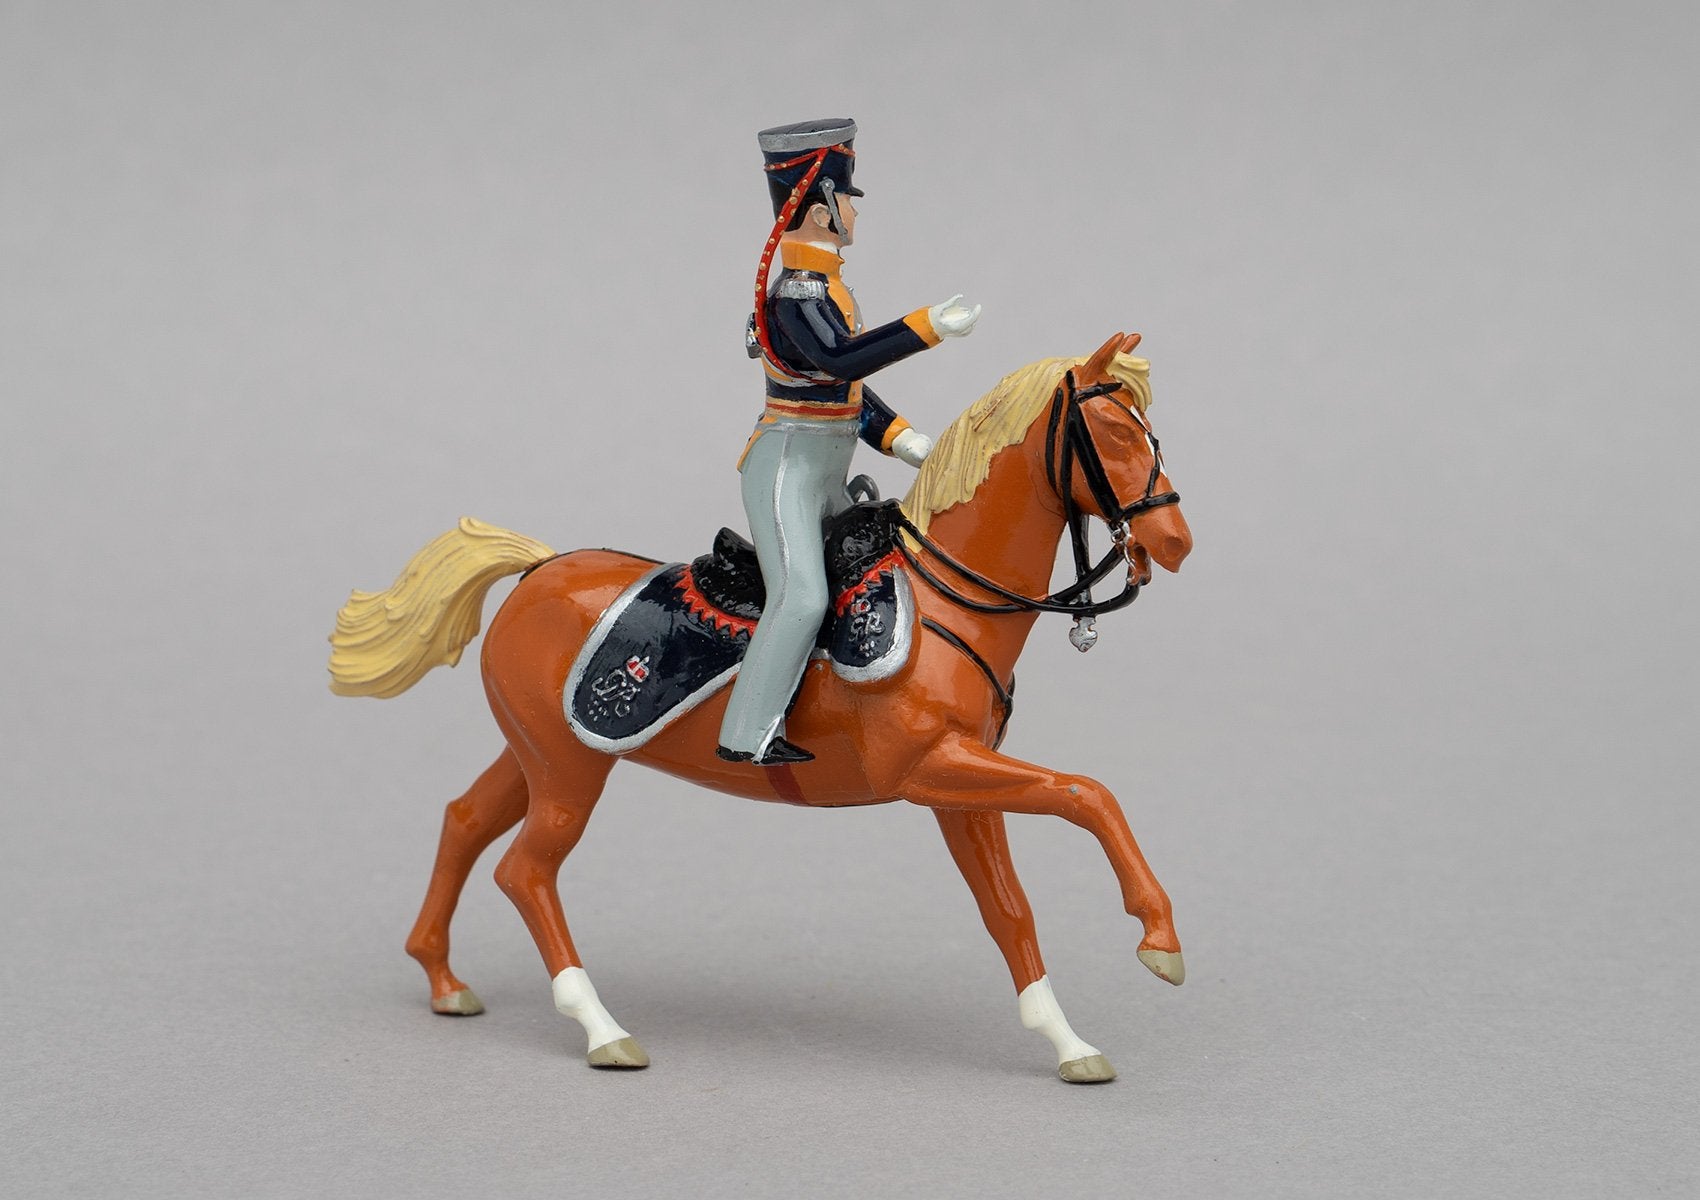 Set 115 Major Henry Percy, Waterloo 1815 | British | Napoleonic Wars | British aide-de-campe to the Duke of Wellington at Waterloo. Napoleonic Wars. Relayed news of victory to London. He is in the uniform of his regiment, the 14th Light Dragoons. Single mounted figure on chestnut horse | Waterloo | © Imperial Productions | Sculpt by David Cowe